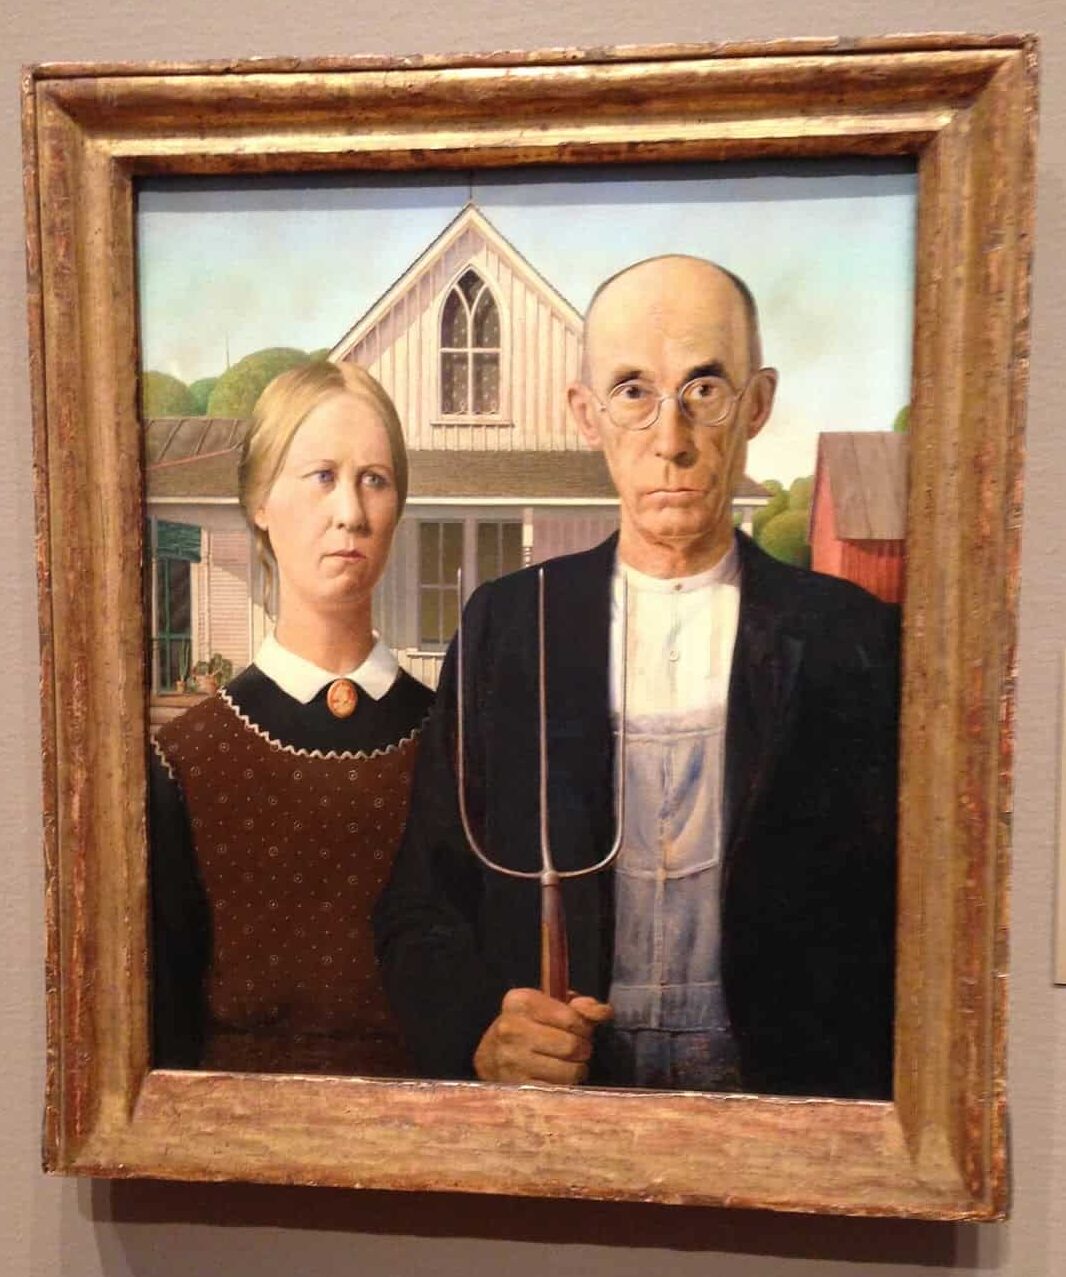 American Gothic by Grant Wood (1930) at the Art Institute of Chicago